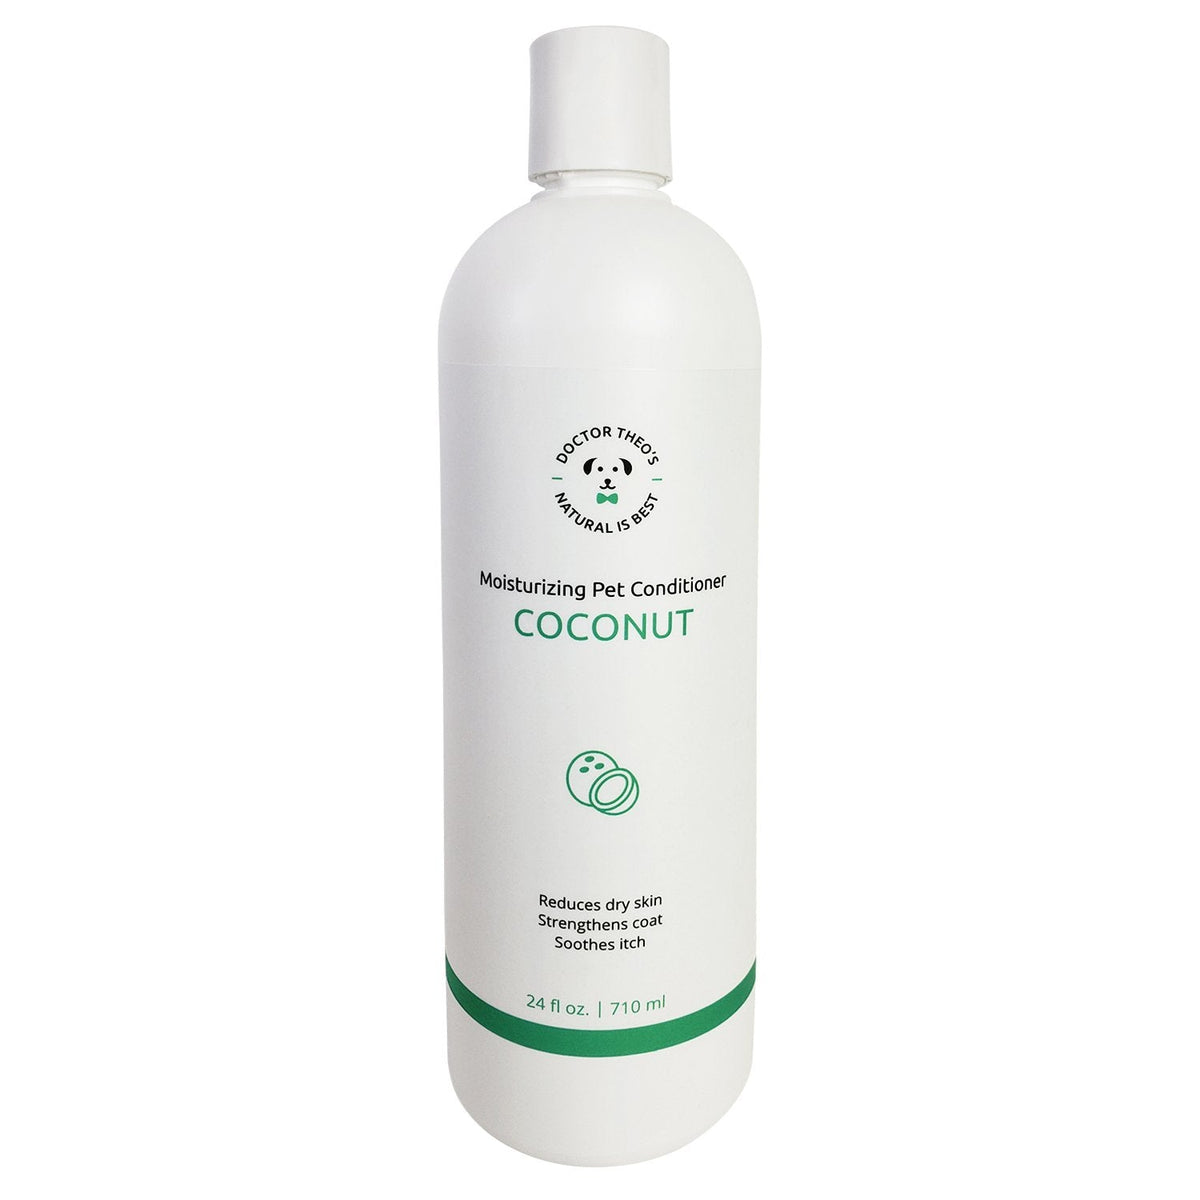 USA Made Pet Conditioner Coconut by American Pet Supplies